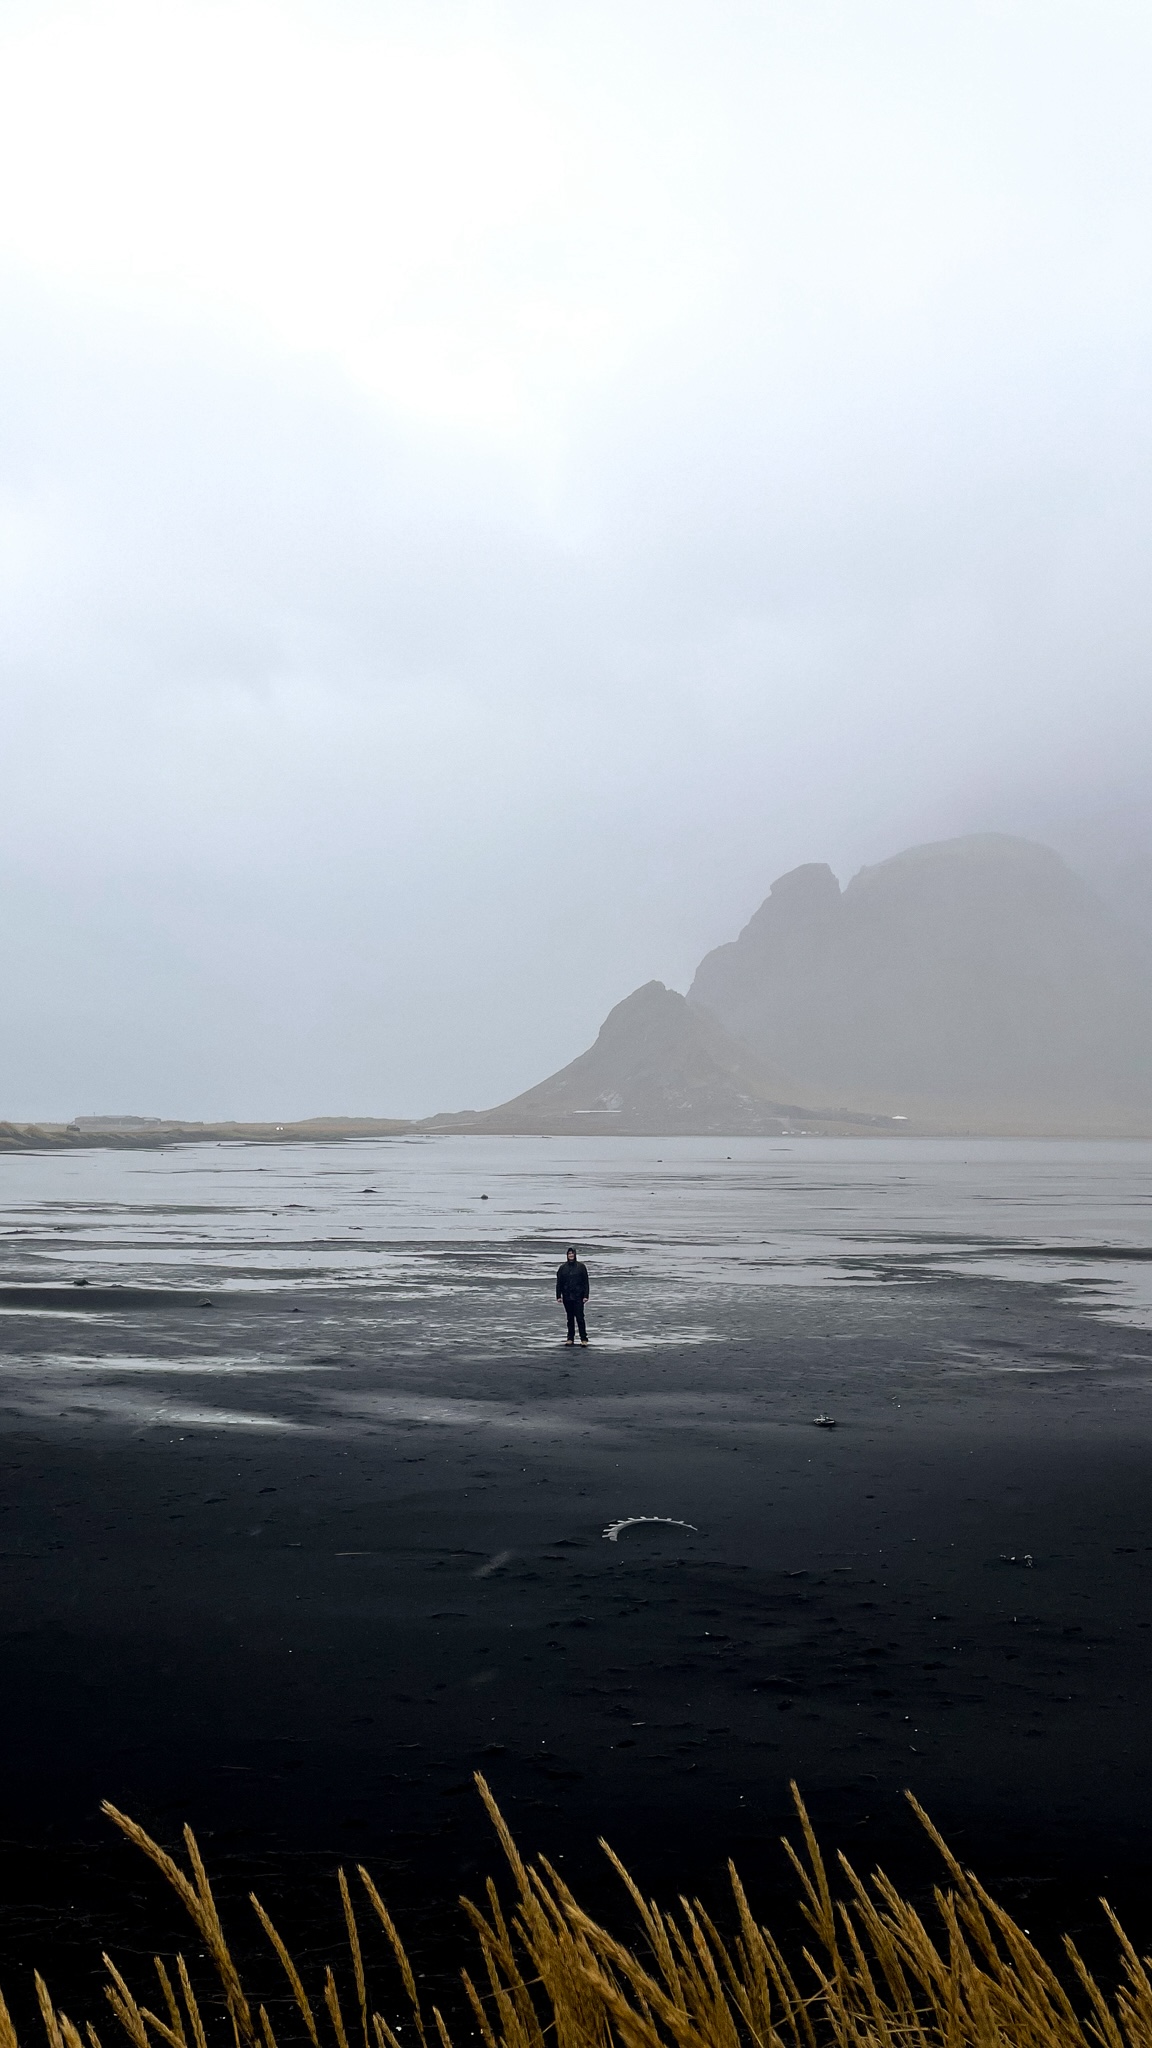 Simon standing in the distance on Stokknes beach in the Vestrahorn area